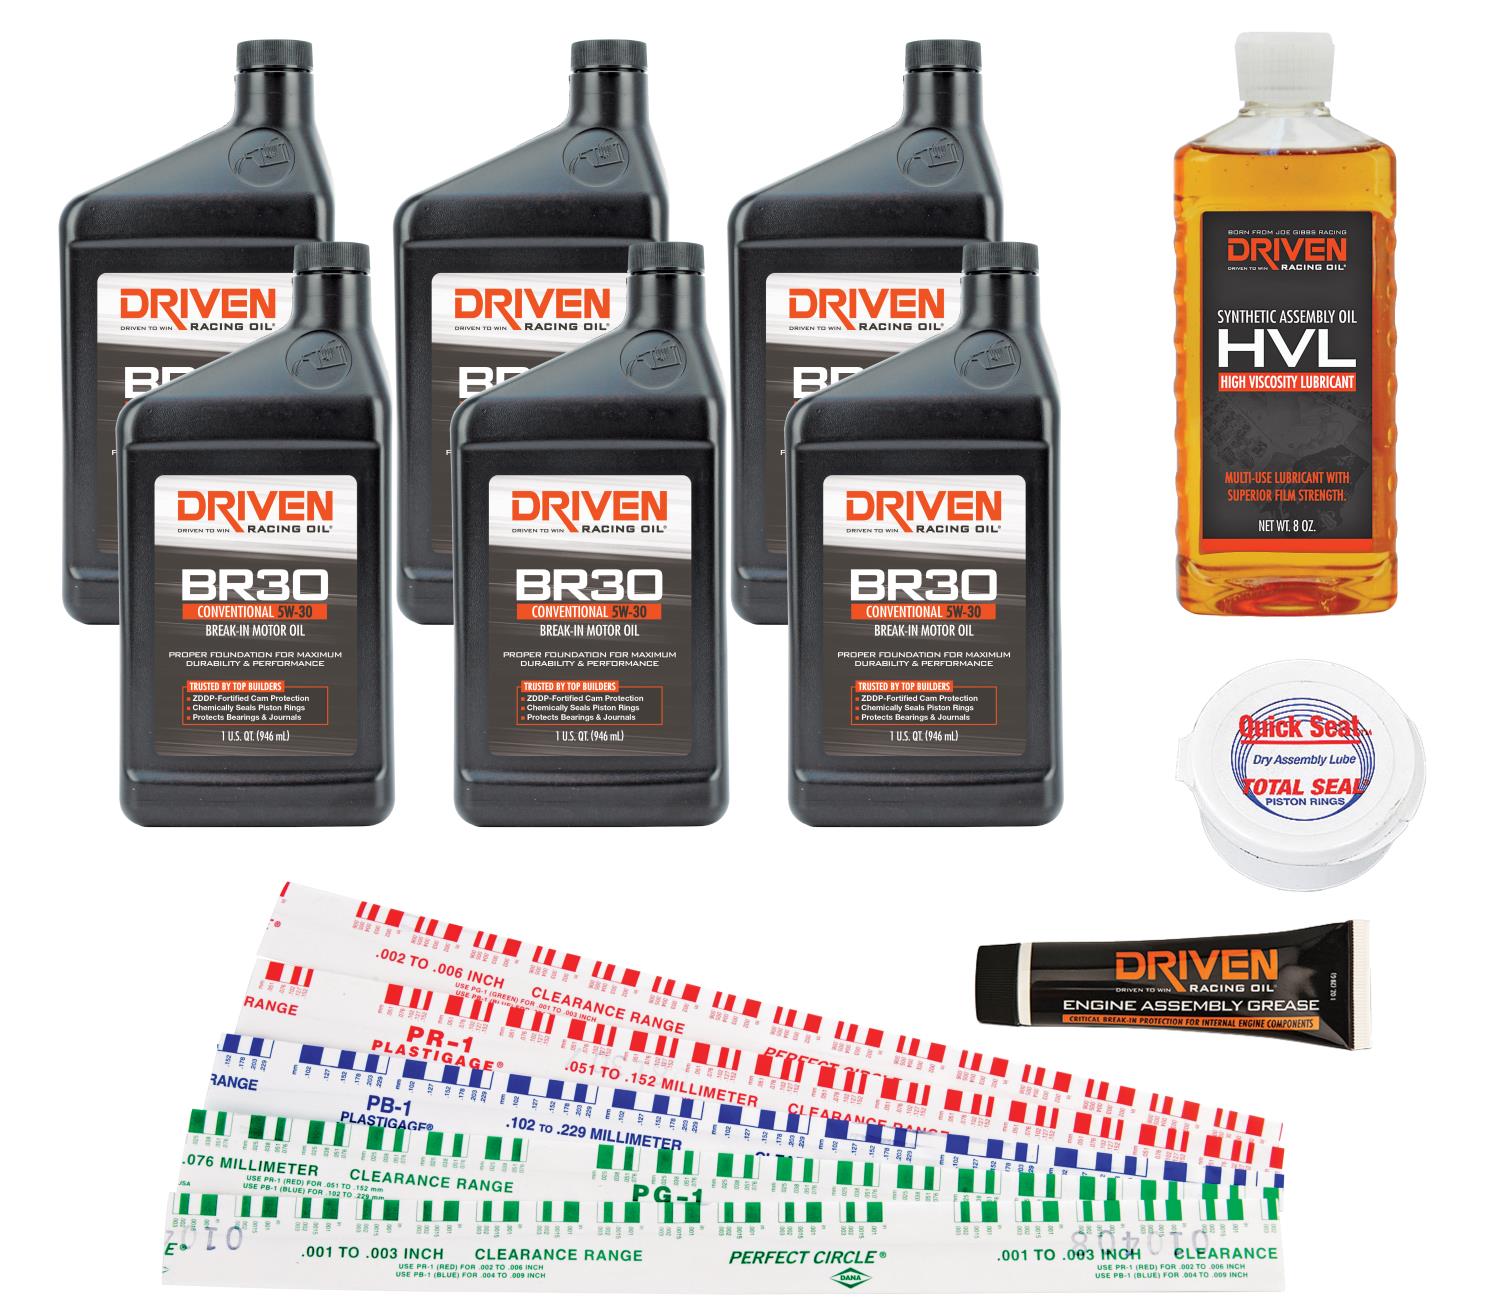 Engine Assembly Lubrication Kit PLUS Includes: (6) Driven